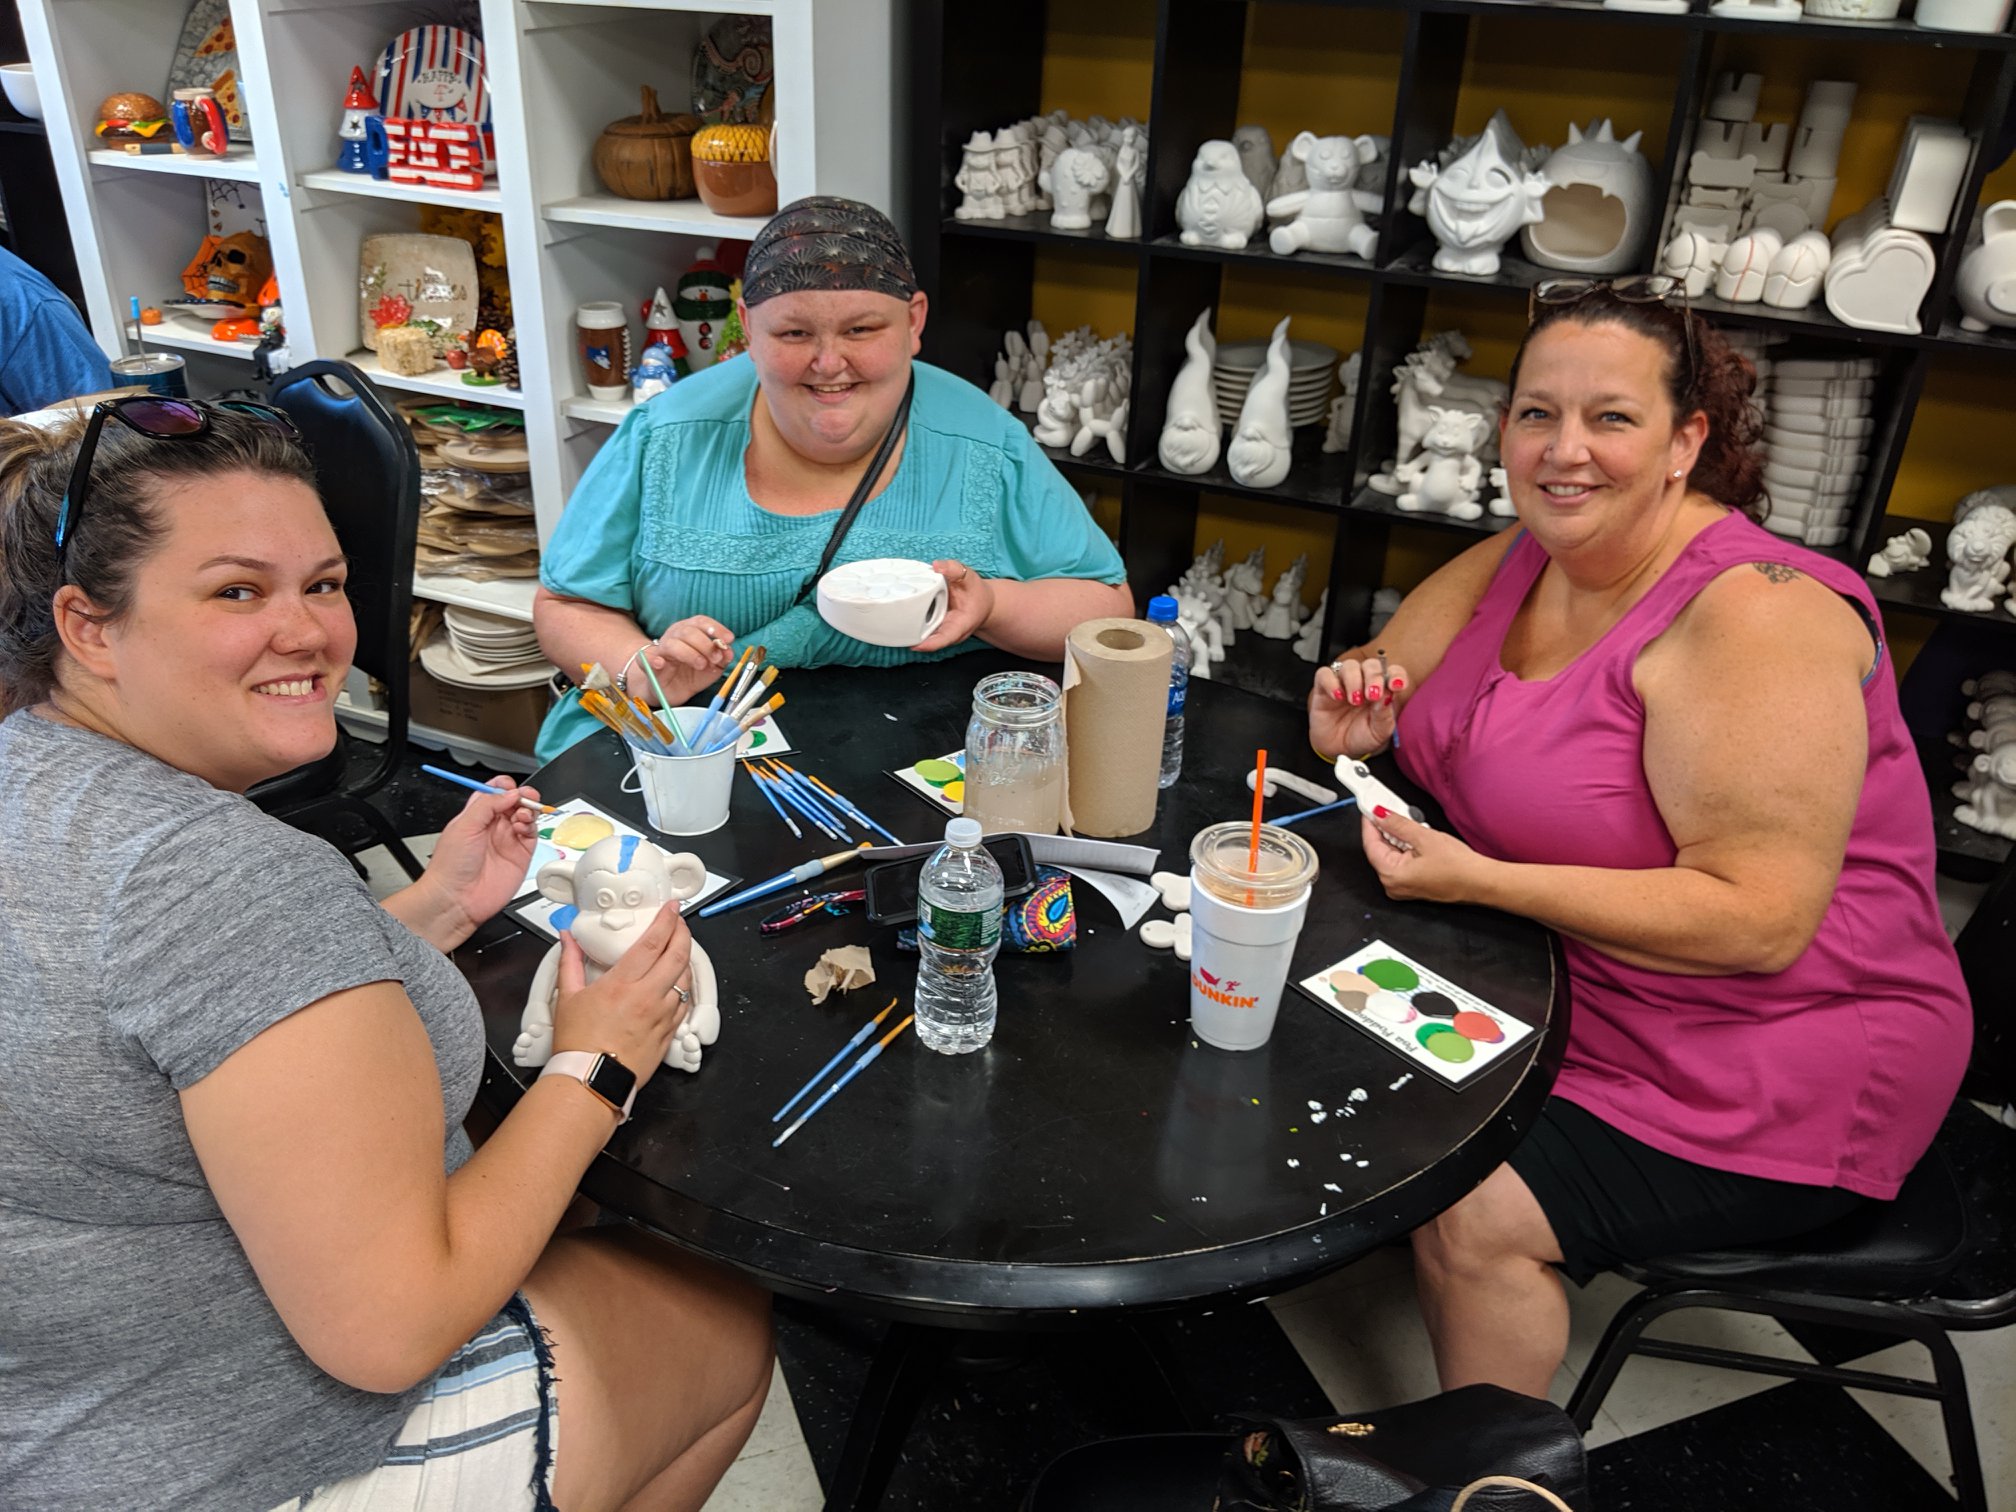 Three people sitting and doing ceramic painting activities